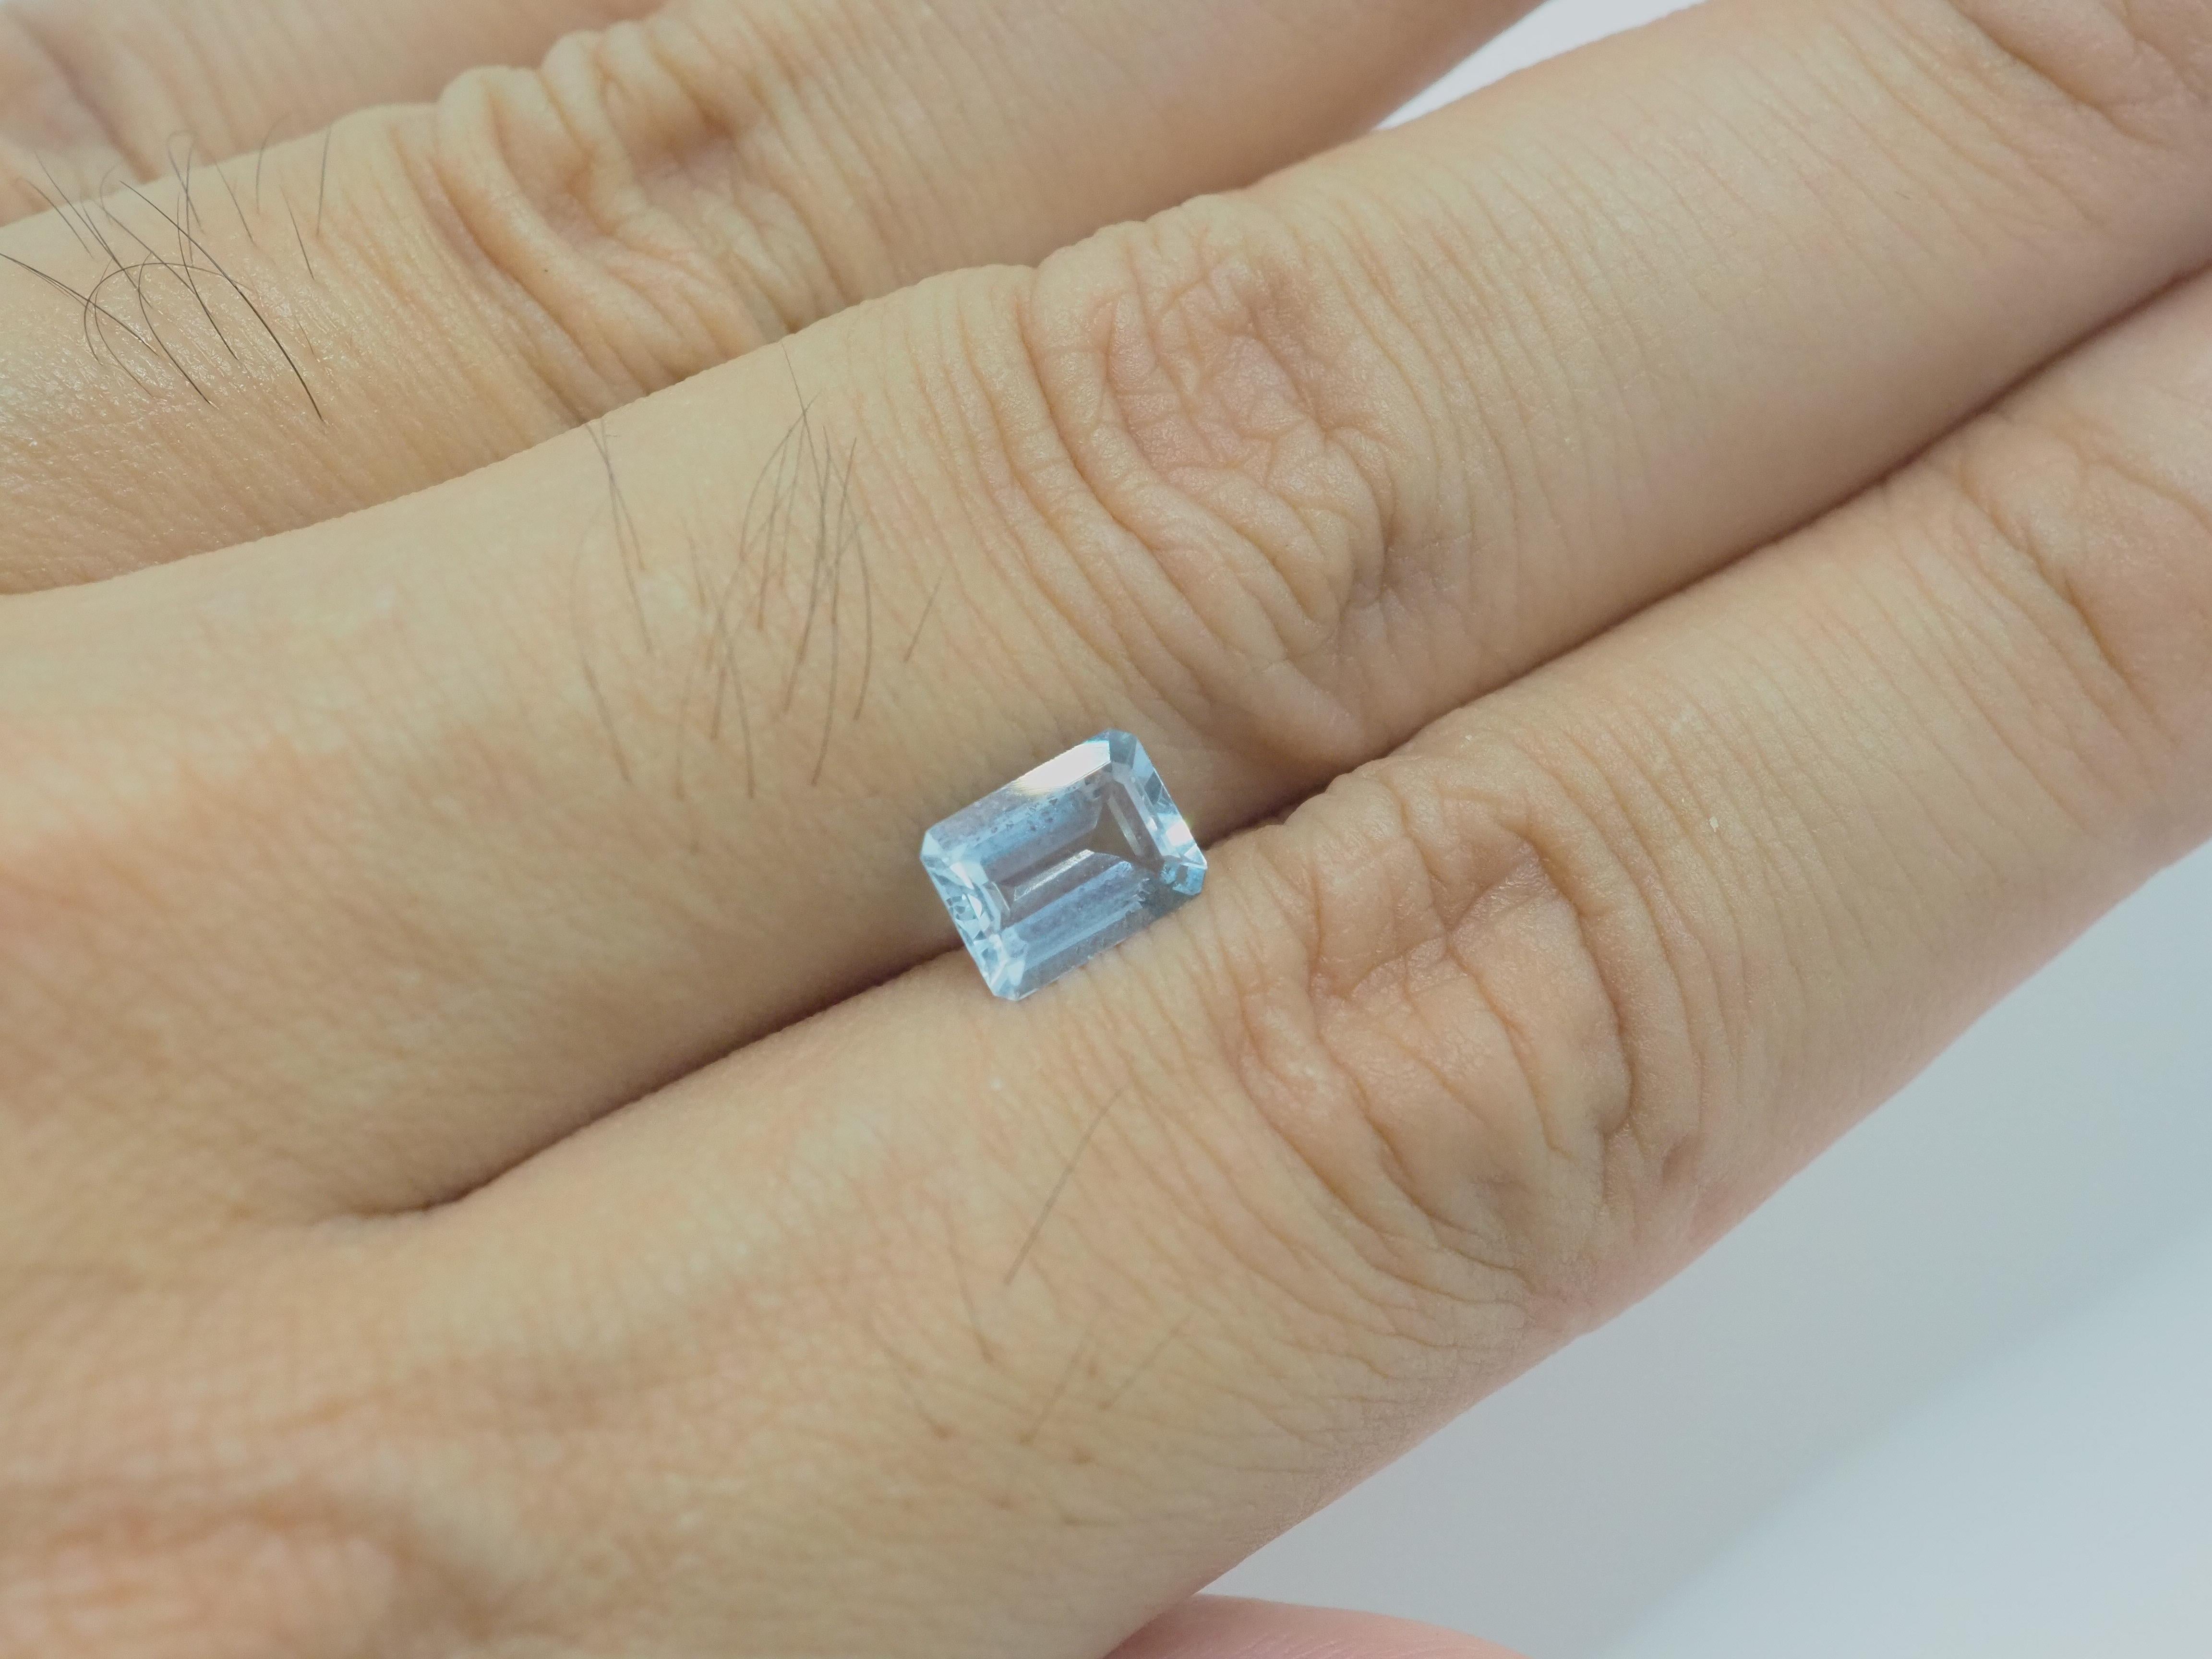 Eye clean aquamarine!

This particular gem measures approximately 8x6x3.5mm, providing ample space for intricate and creative dainty ring designs.

Lovely Icy-blue color emerald cut aquamarine
Weight= 1.21 carats

-Come with small gemstone box